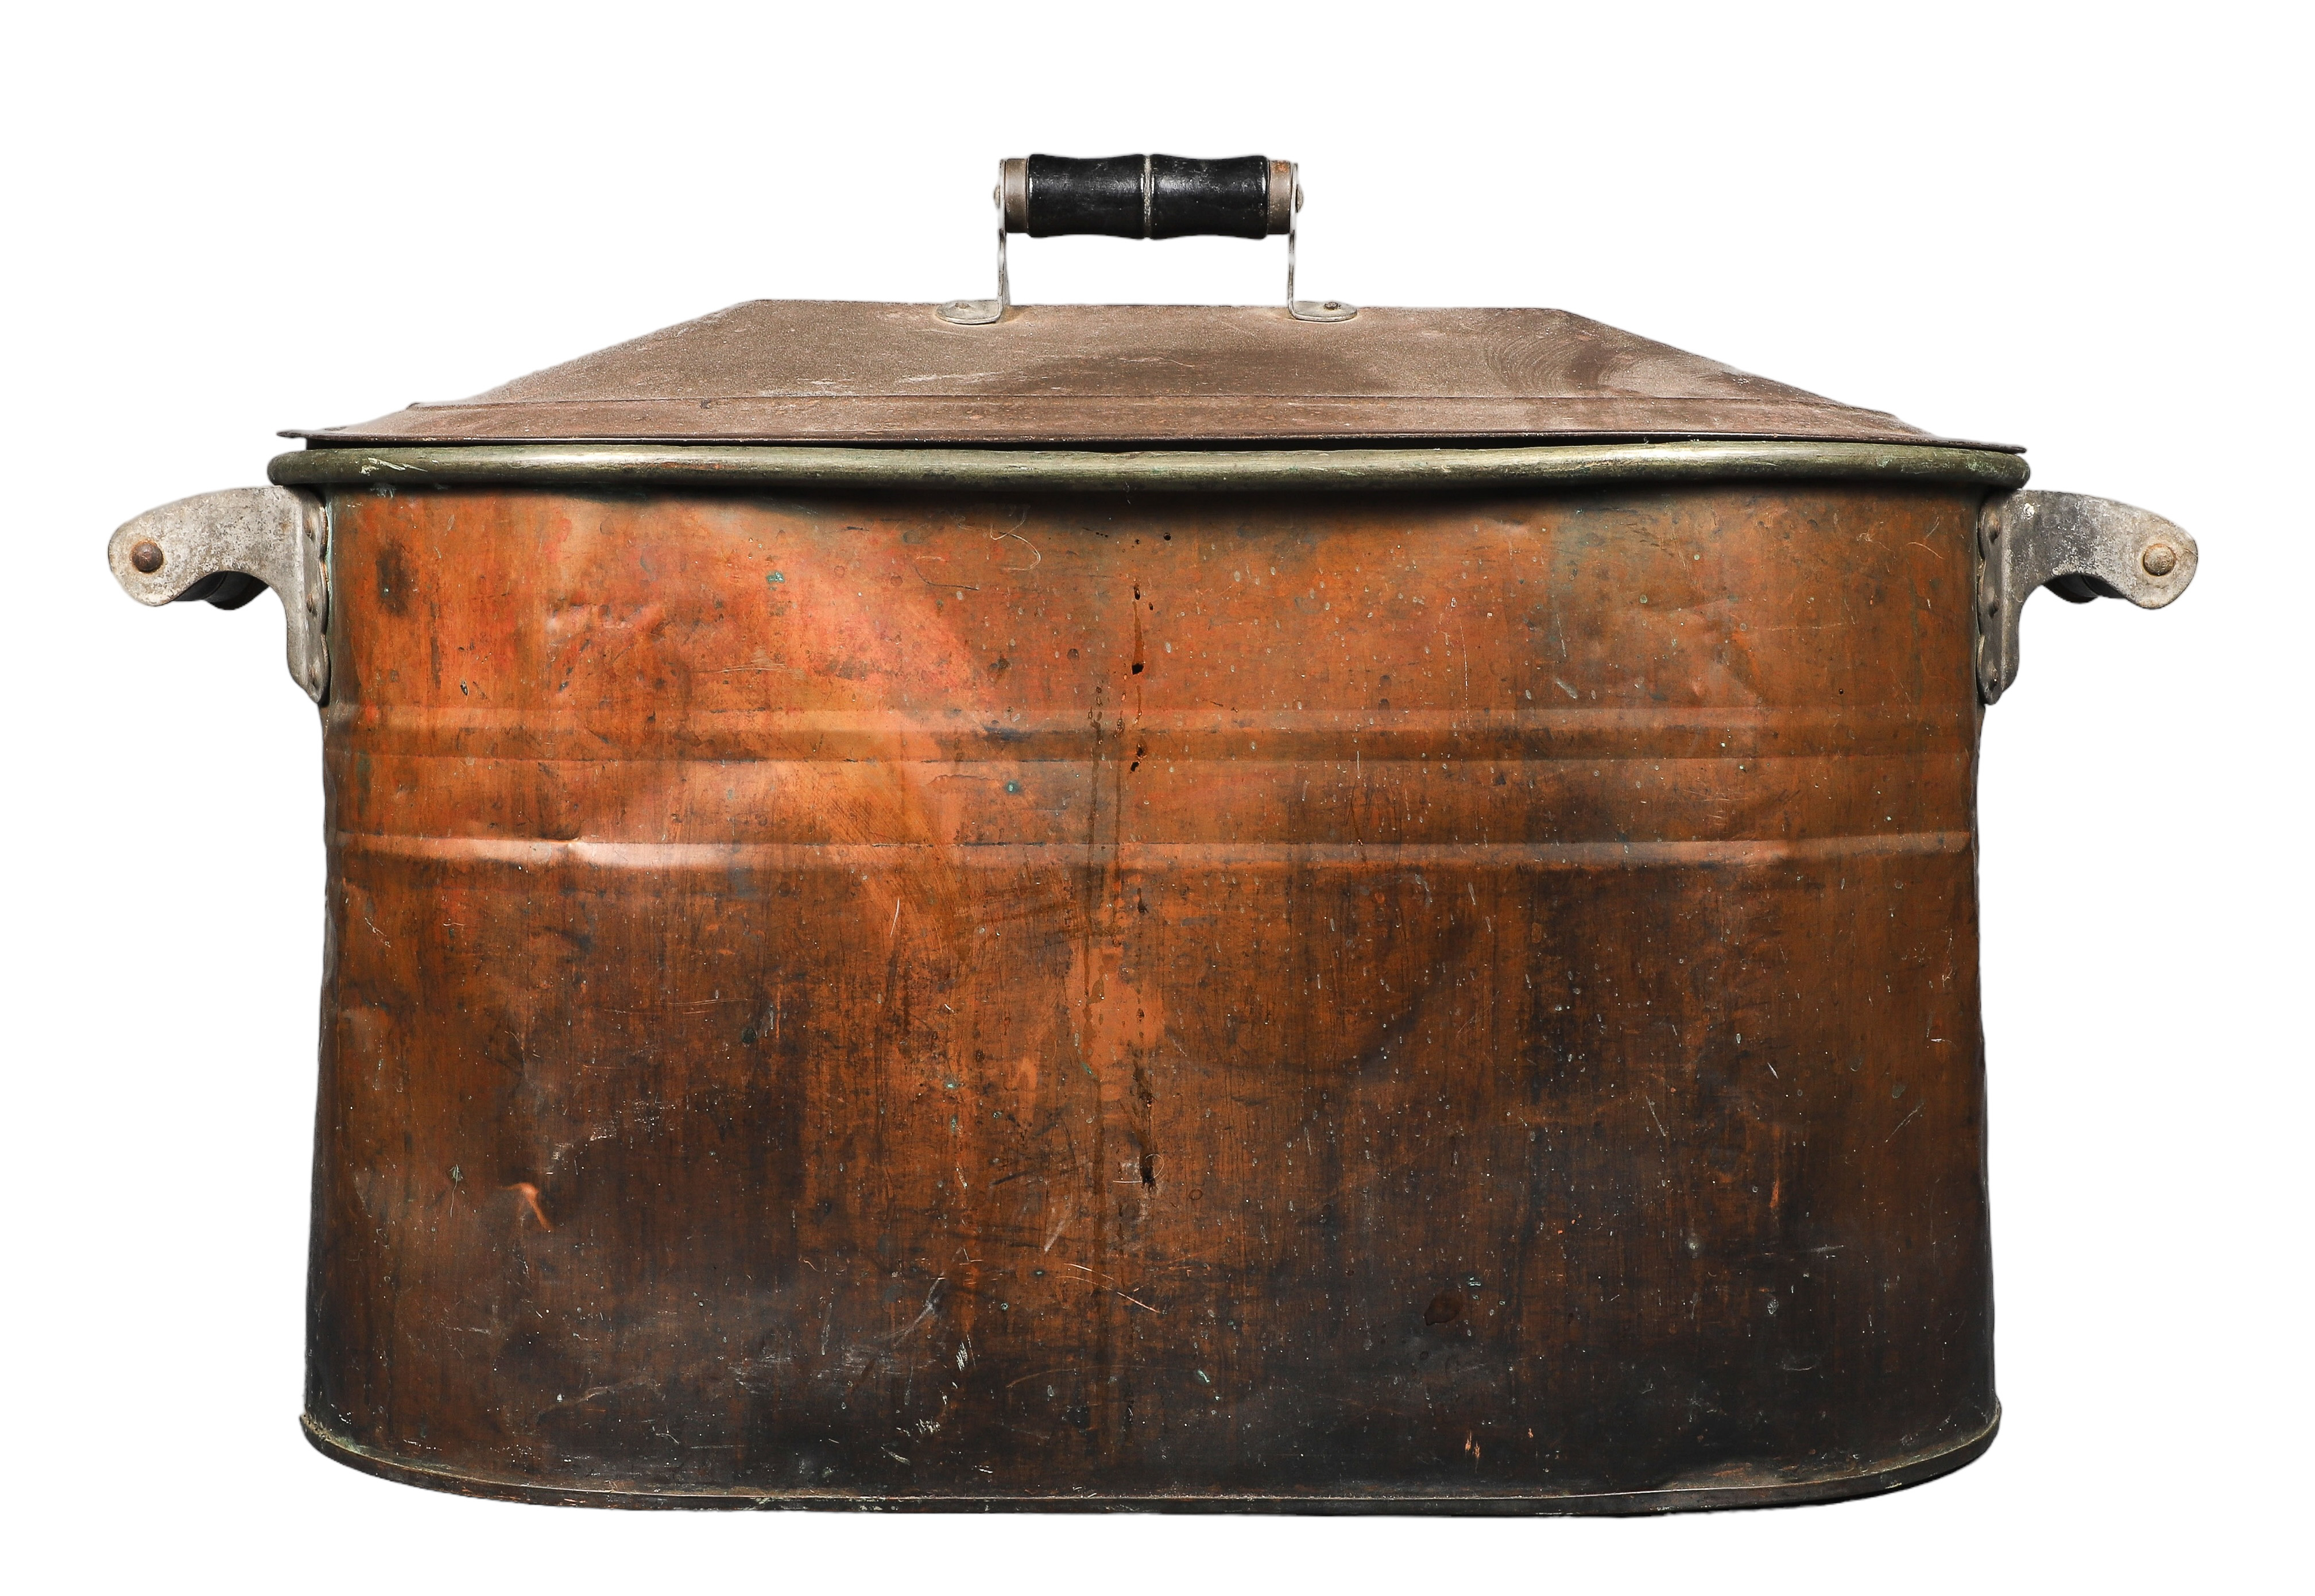 Copper wash boiler with lid, 24 x 13